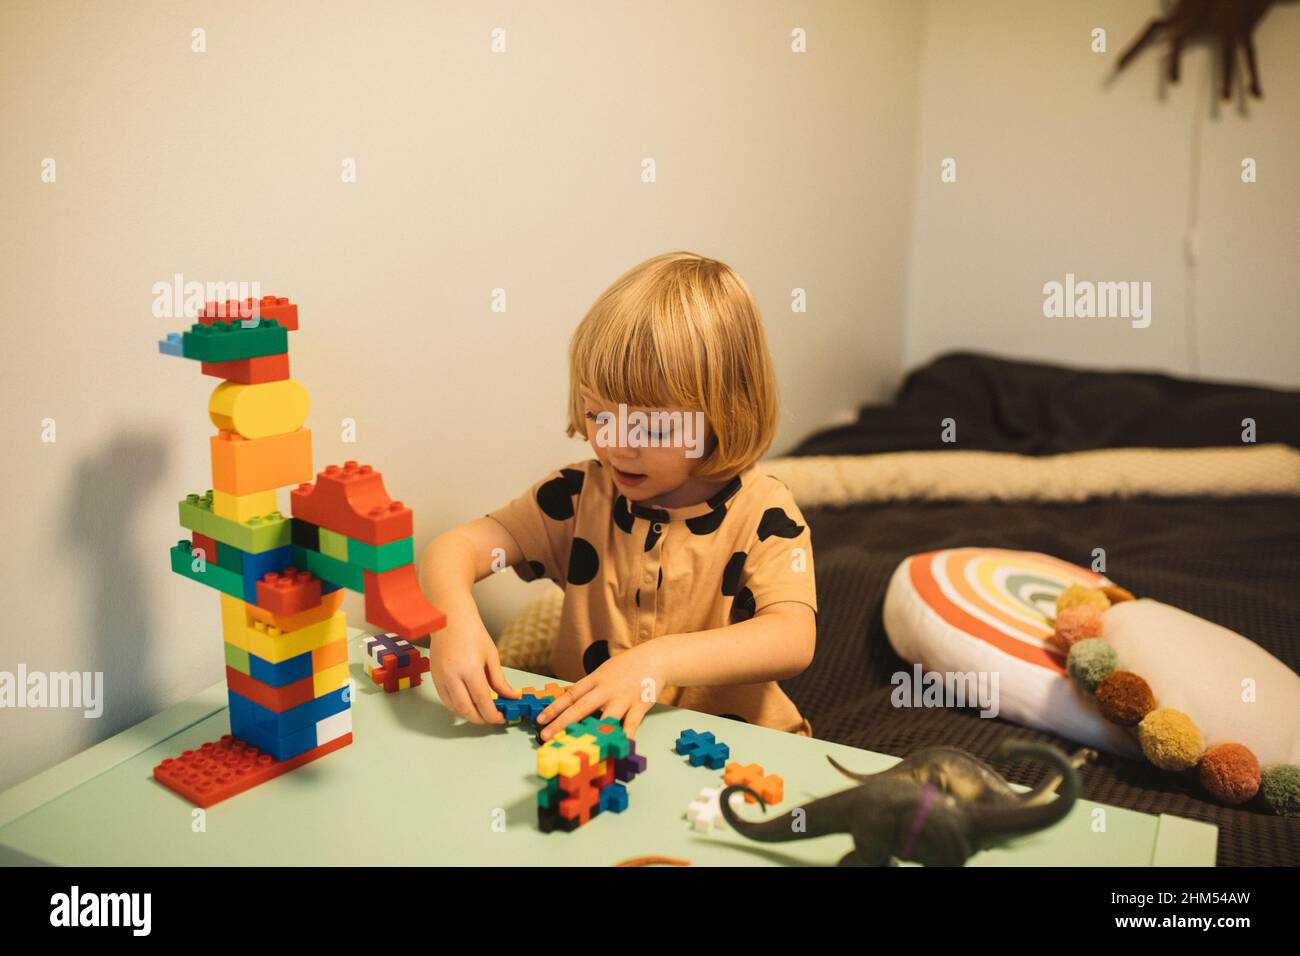 Girl playing with toy blocks Stock Photo